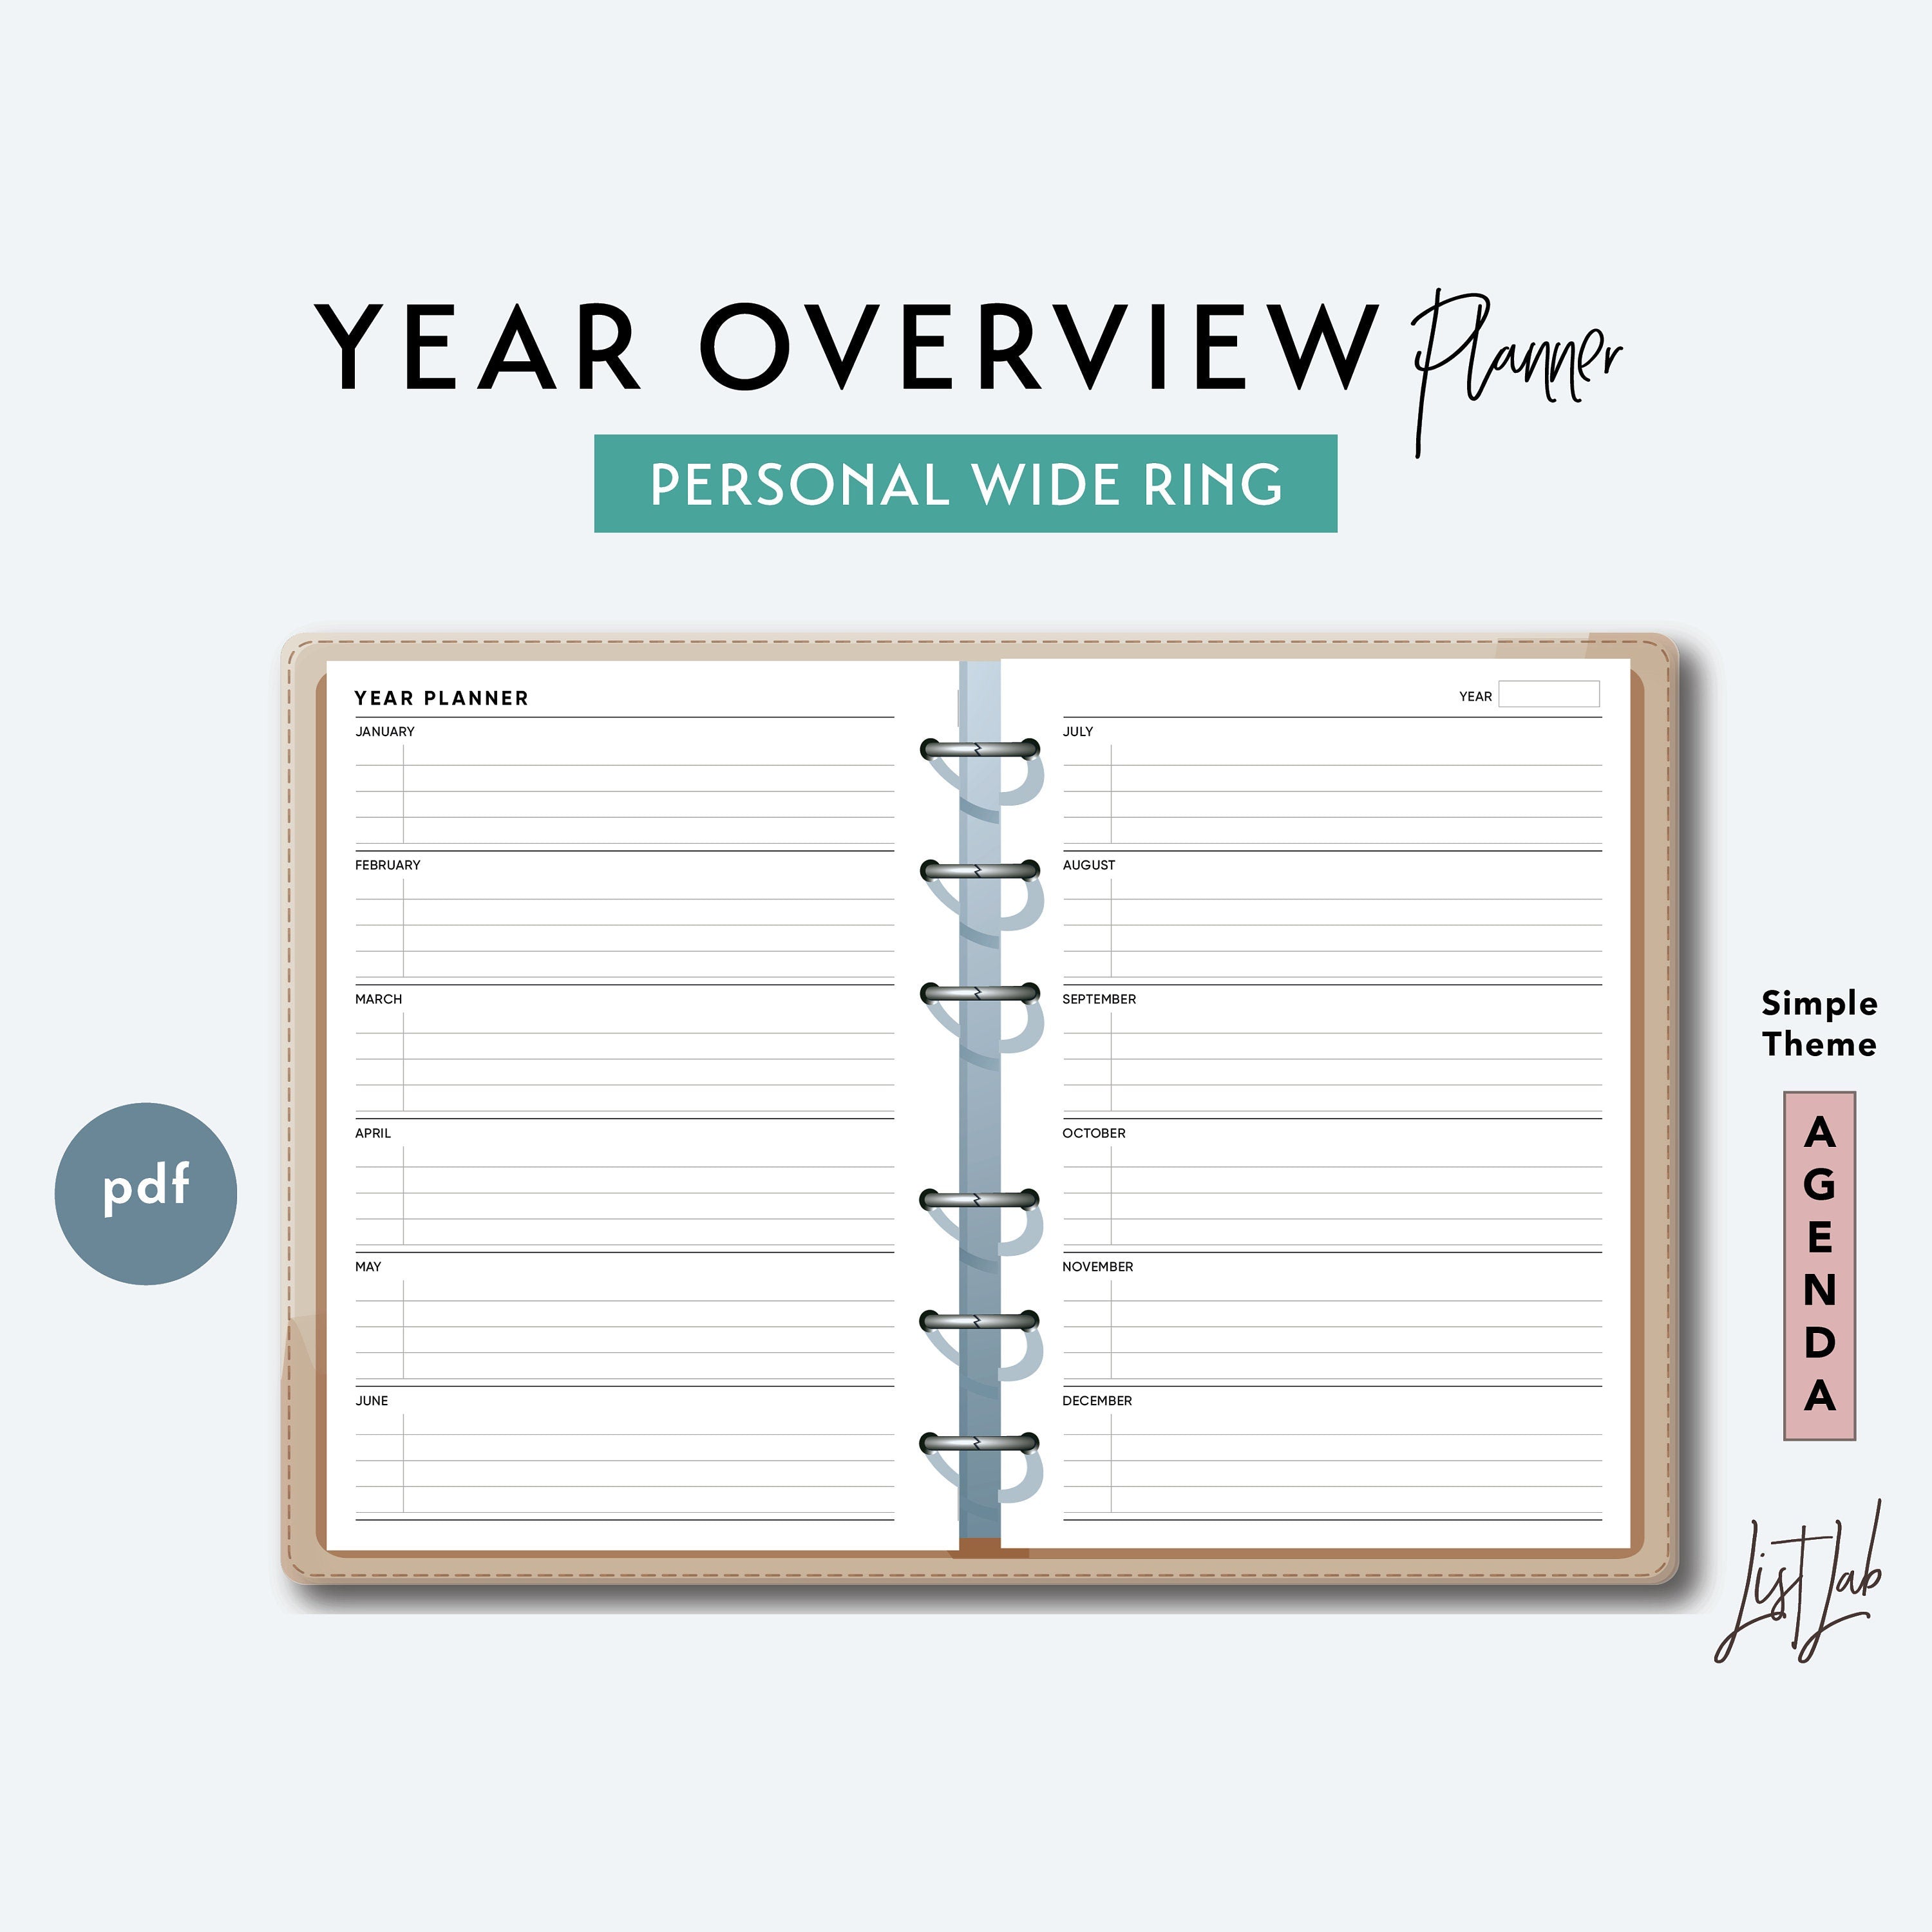 Personal Wide Ring YEAR OVERVIEW PLANNER Printable Insert Set